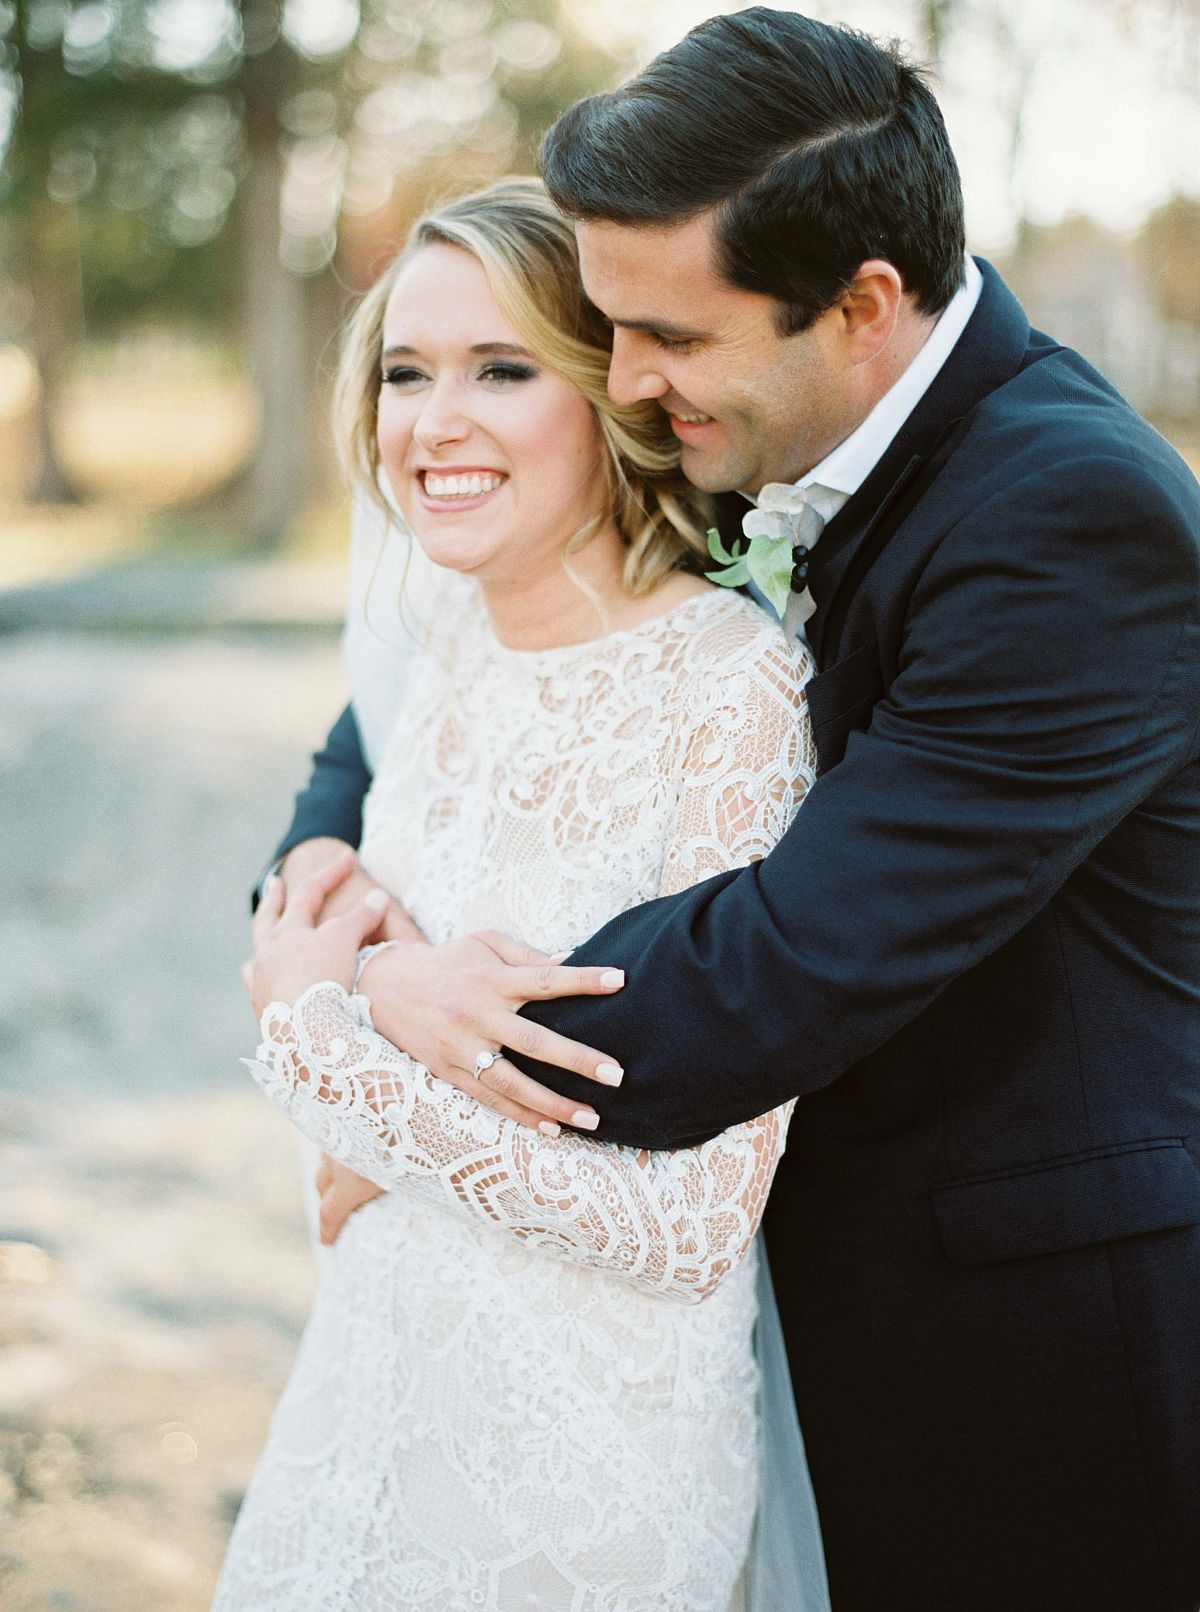 Romantic Garden Wedding Inspiration in a Lace Dress